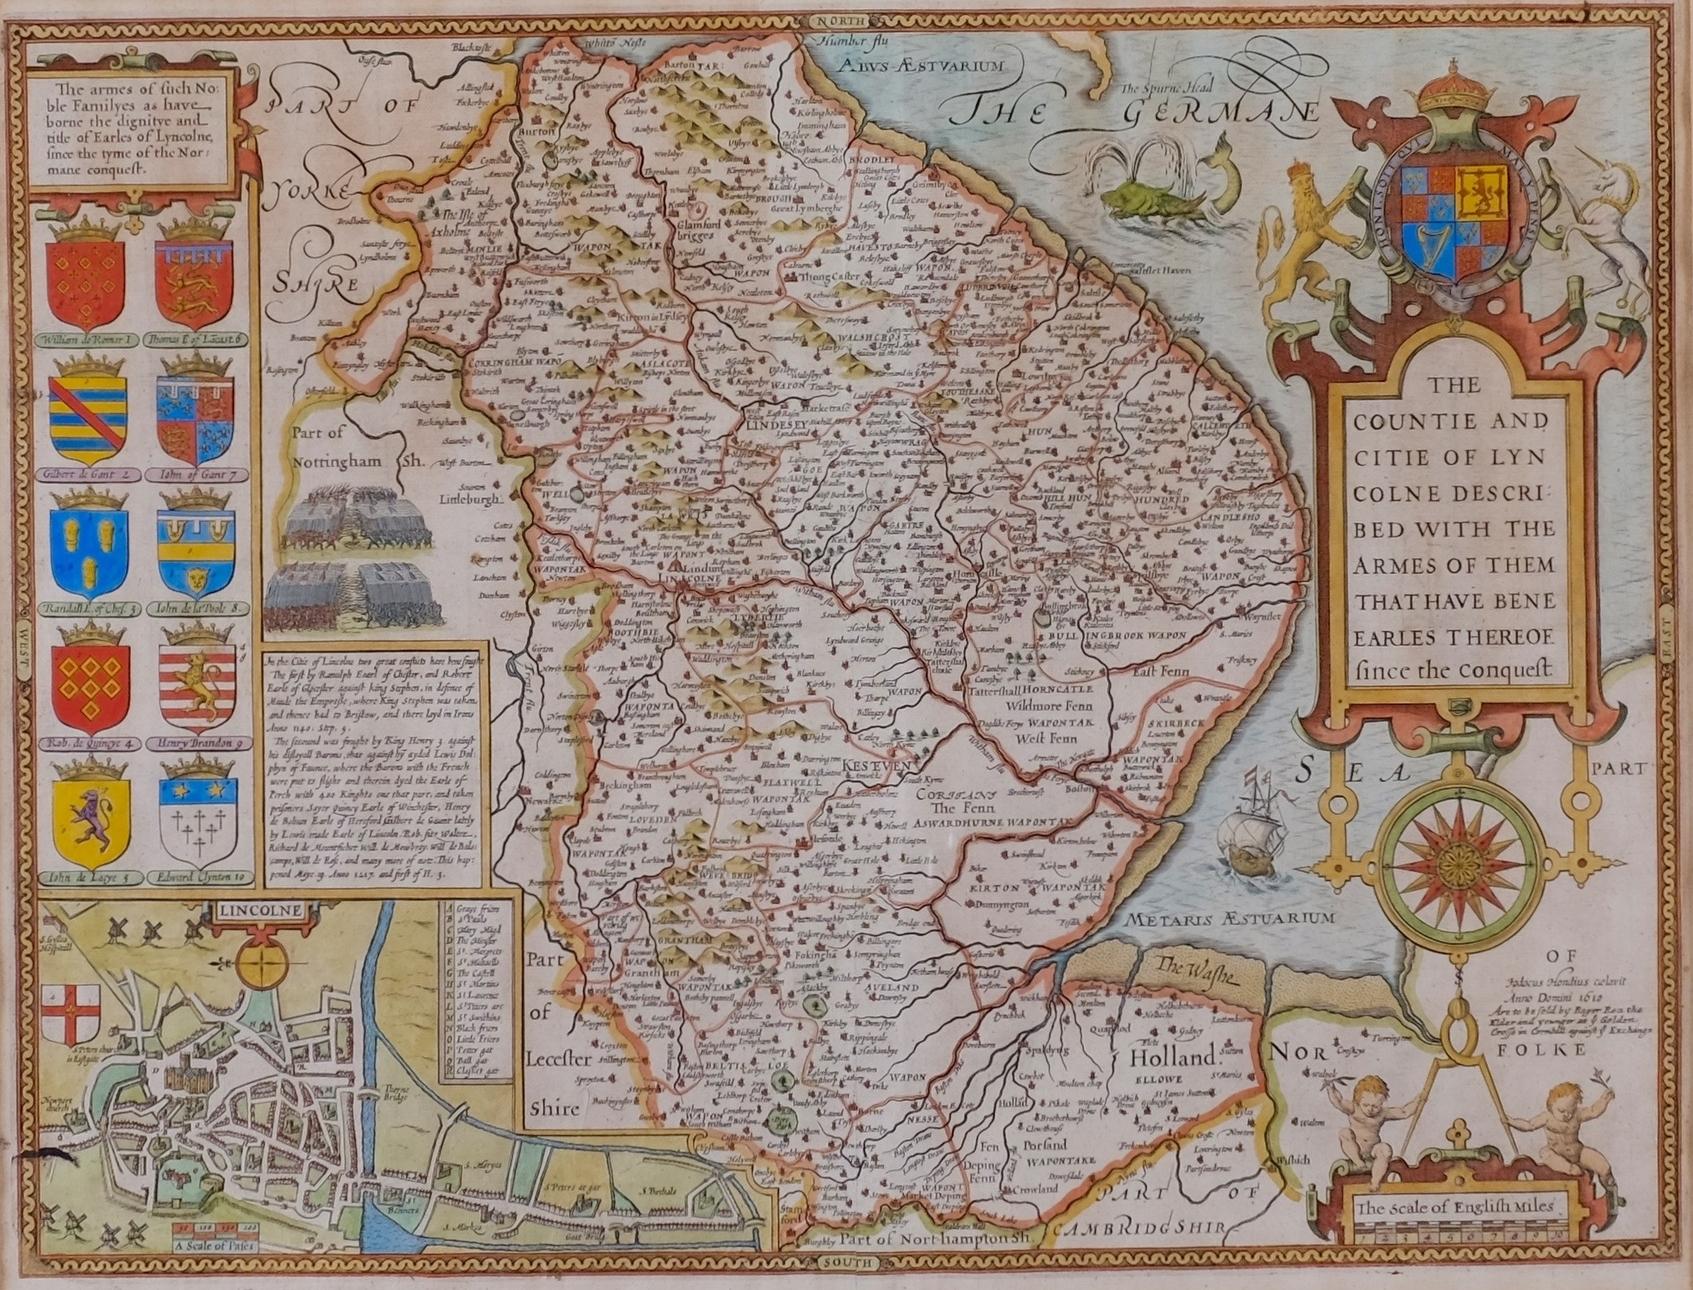 Antique map of Lincoln 

Measures: 65 x 72cm 

A beautifully colourful antique map showing the Heraldic Arms for those 'noble families that have borne the dignitiye and title of Earles of Lyncolne since the tyme of the Normane conquest'.

'The